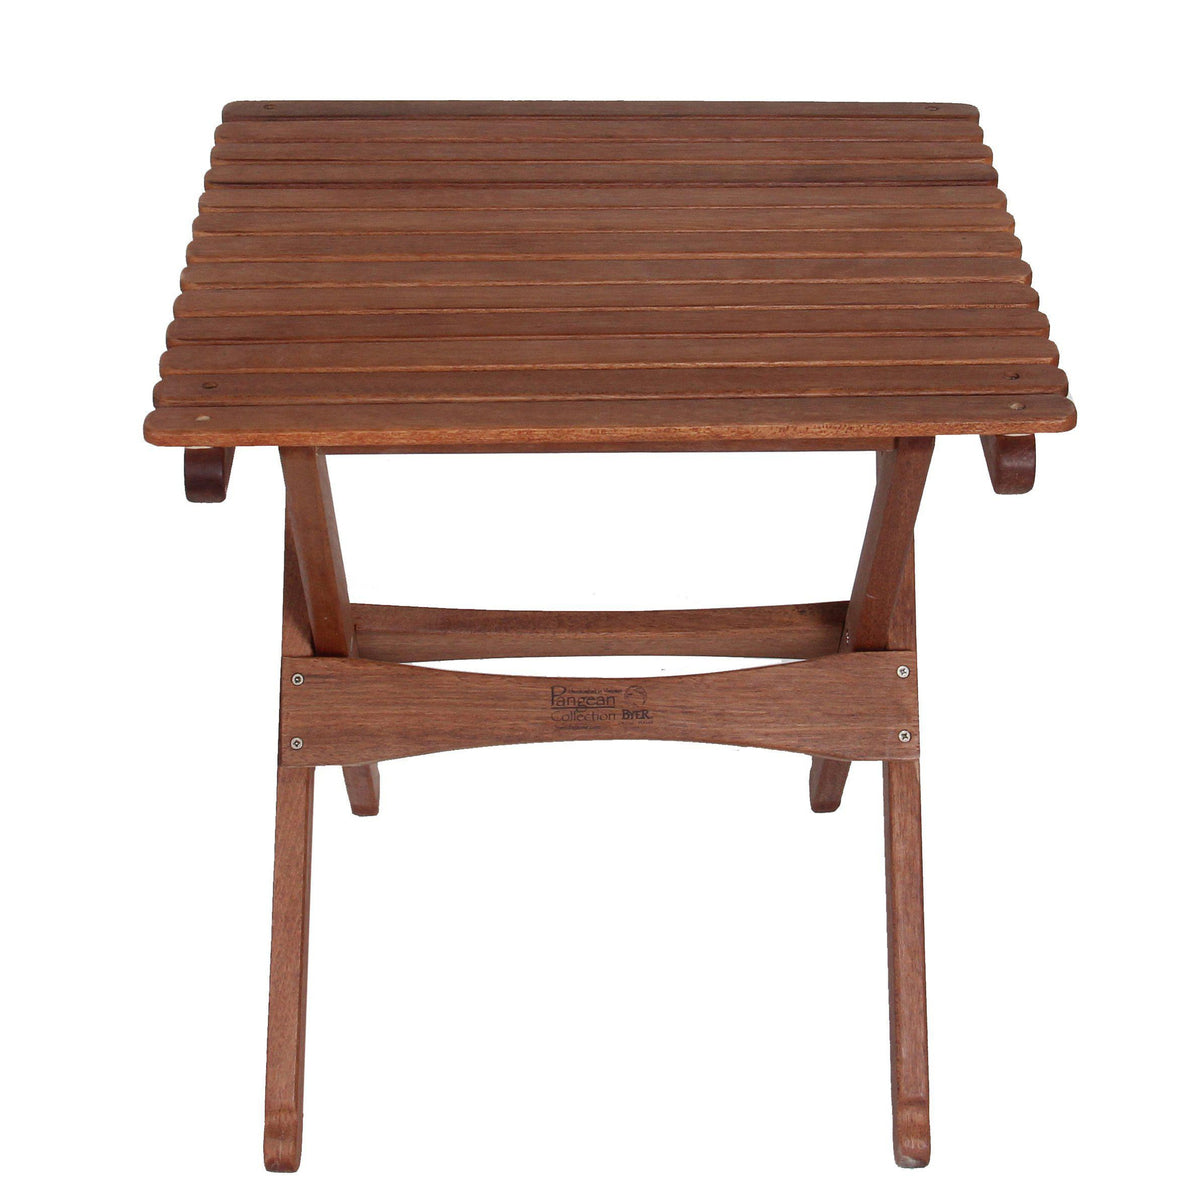 Pangean Folding Table - Large, from Byer of Maine